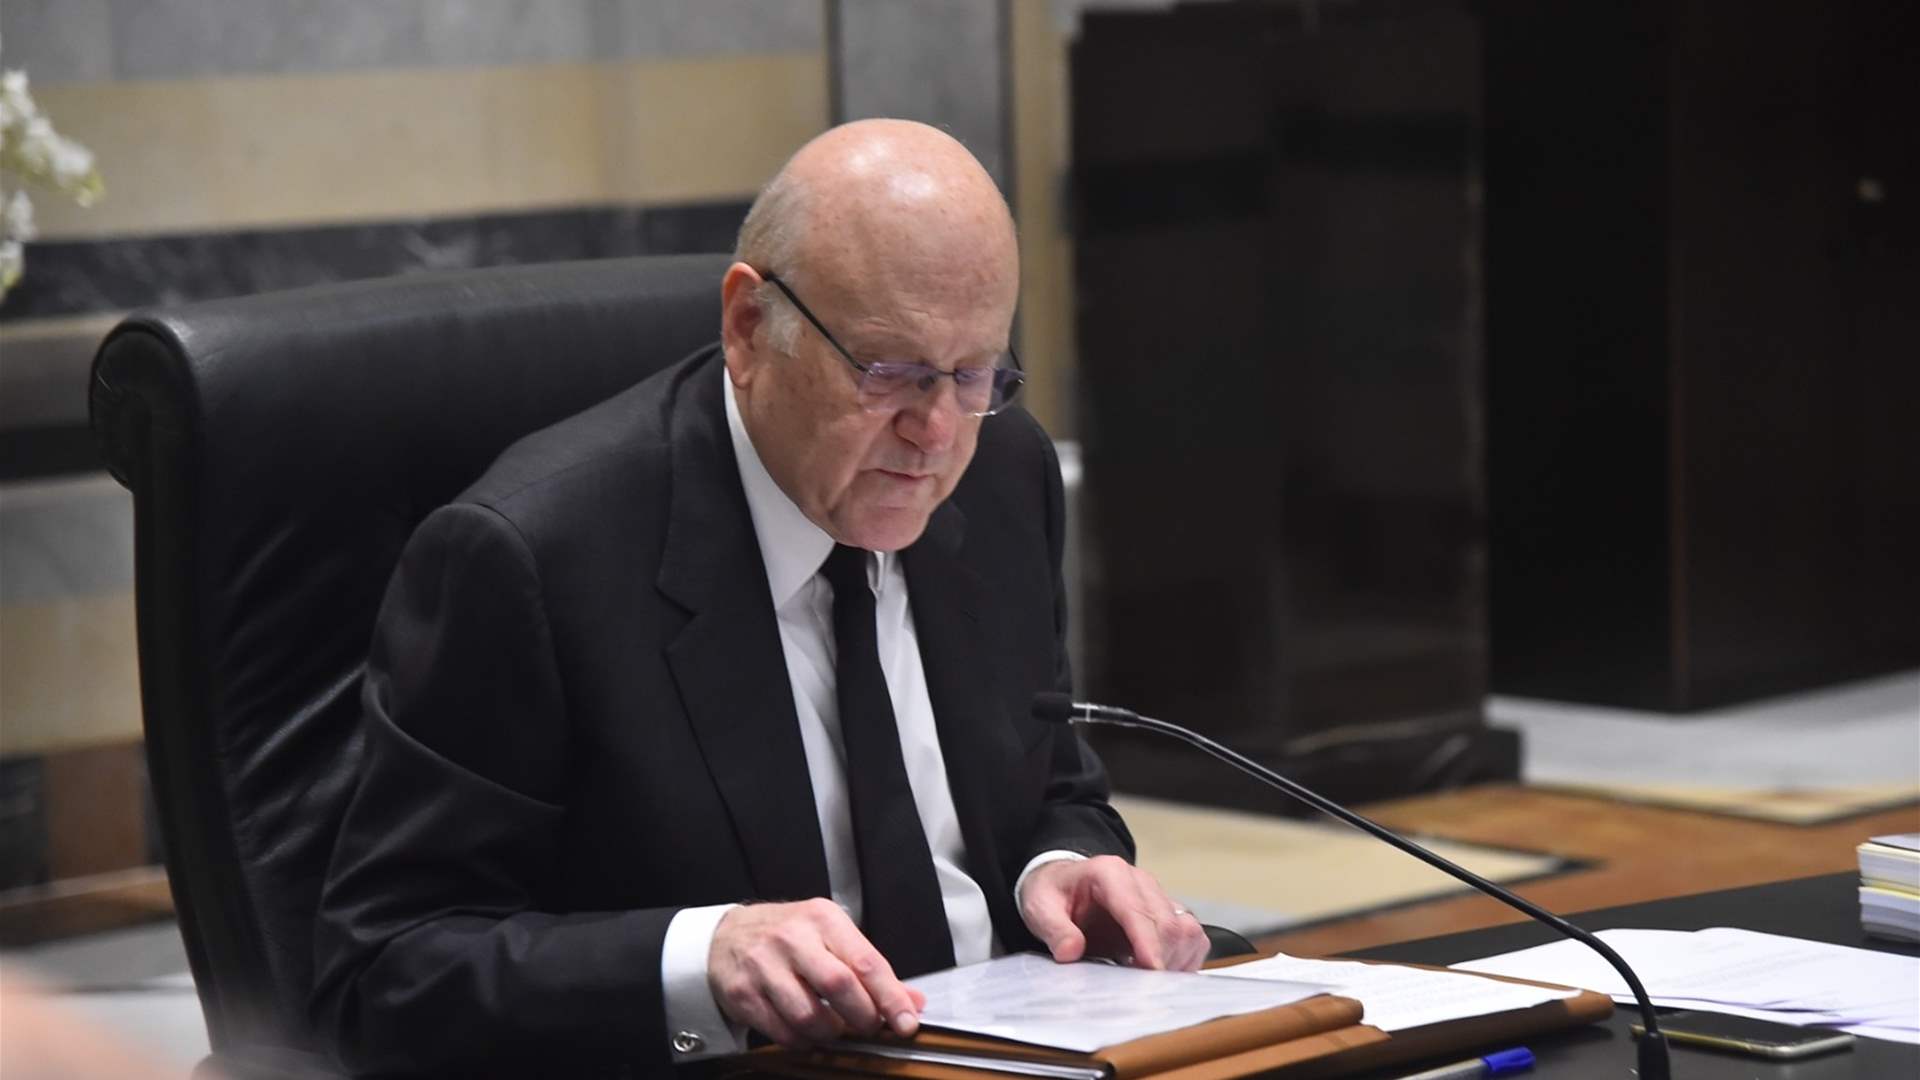 Diplomatic emphasis: Mikati calls for action to stop Israeli aggression in Lebanon